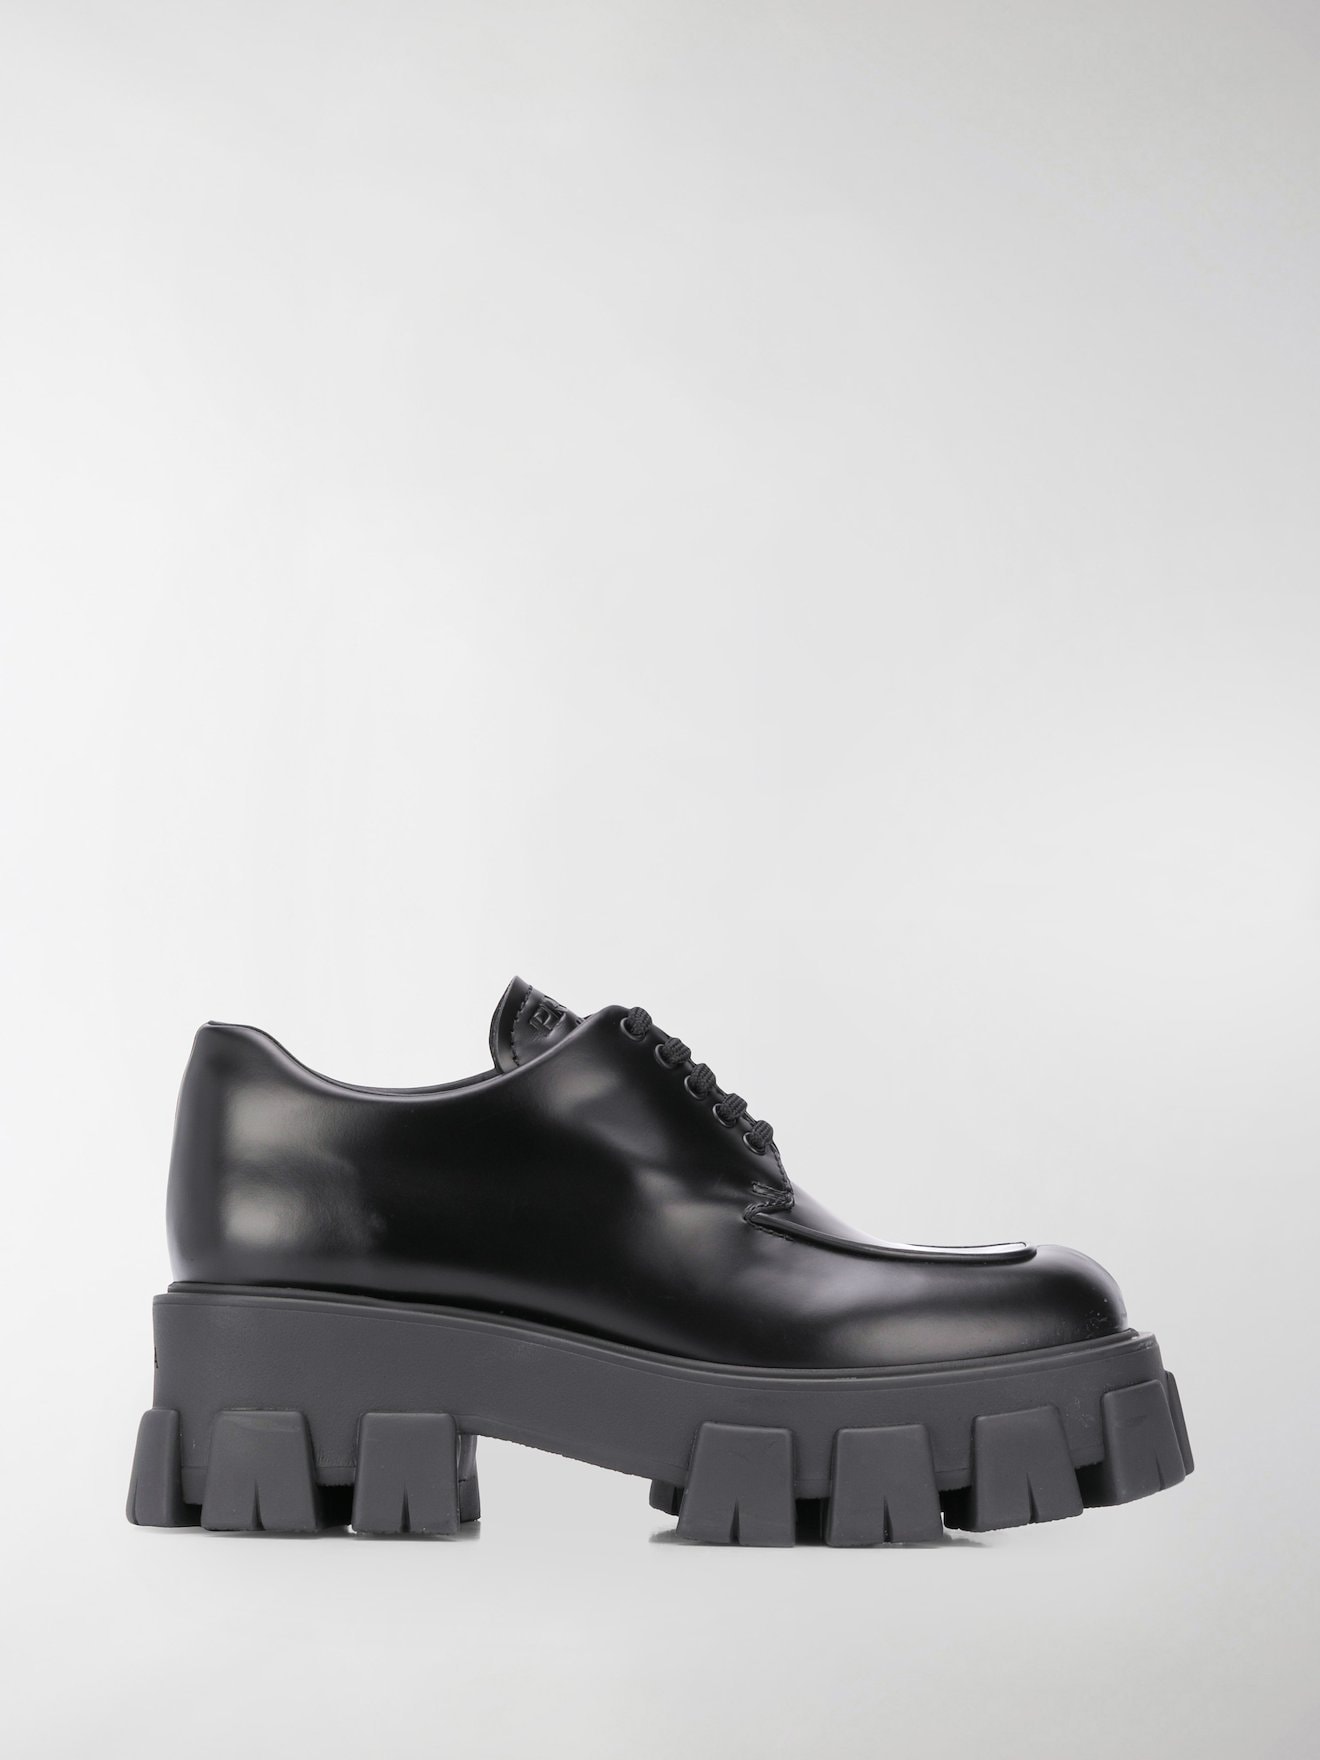 Prada chunky-sole 75mm lace-up shoes black | MODES